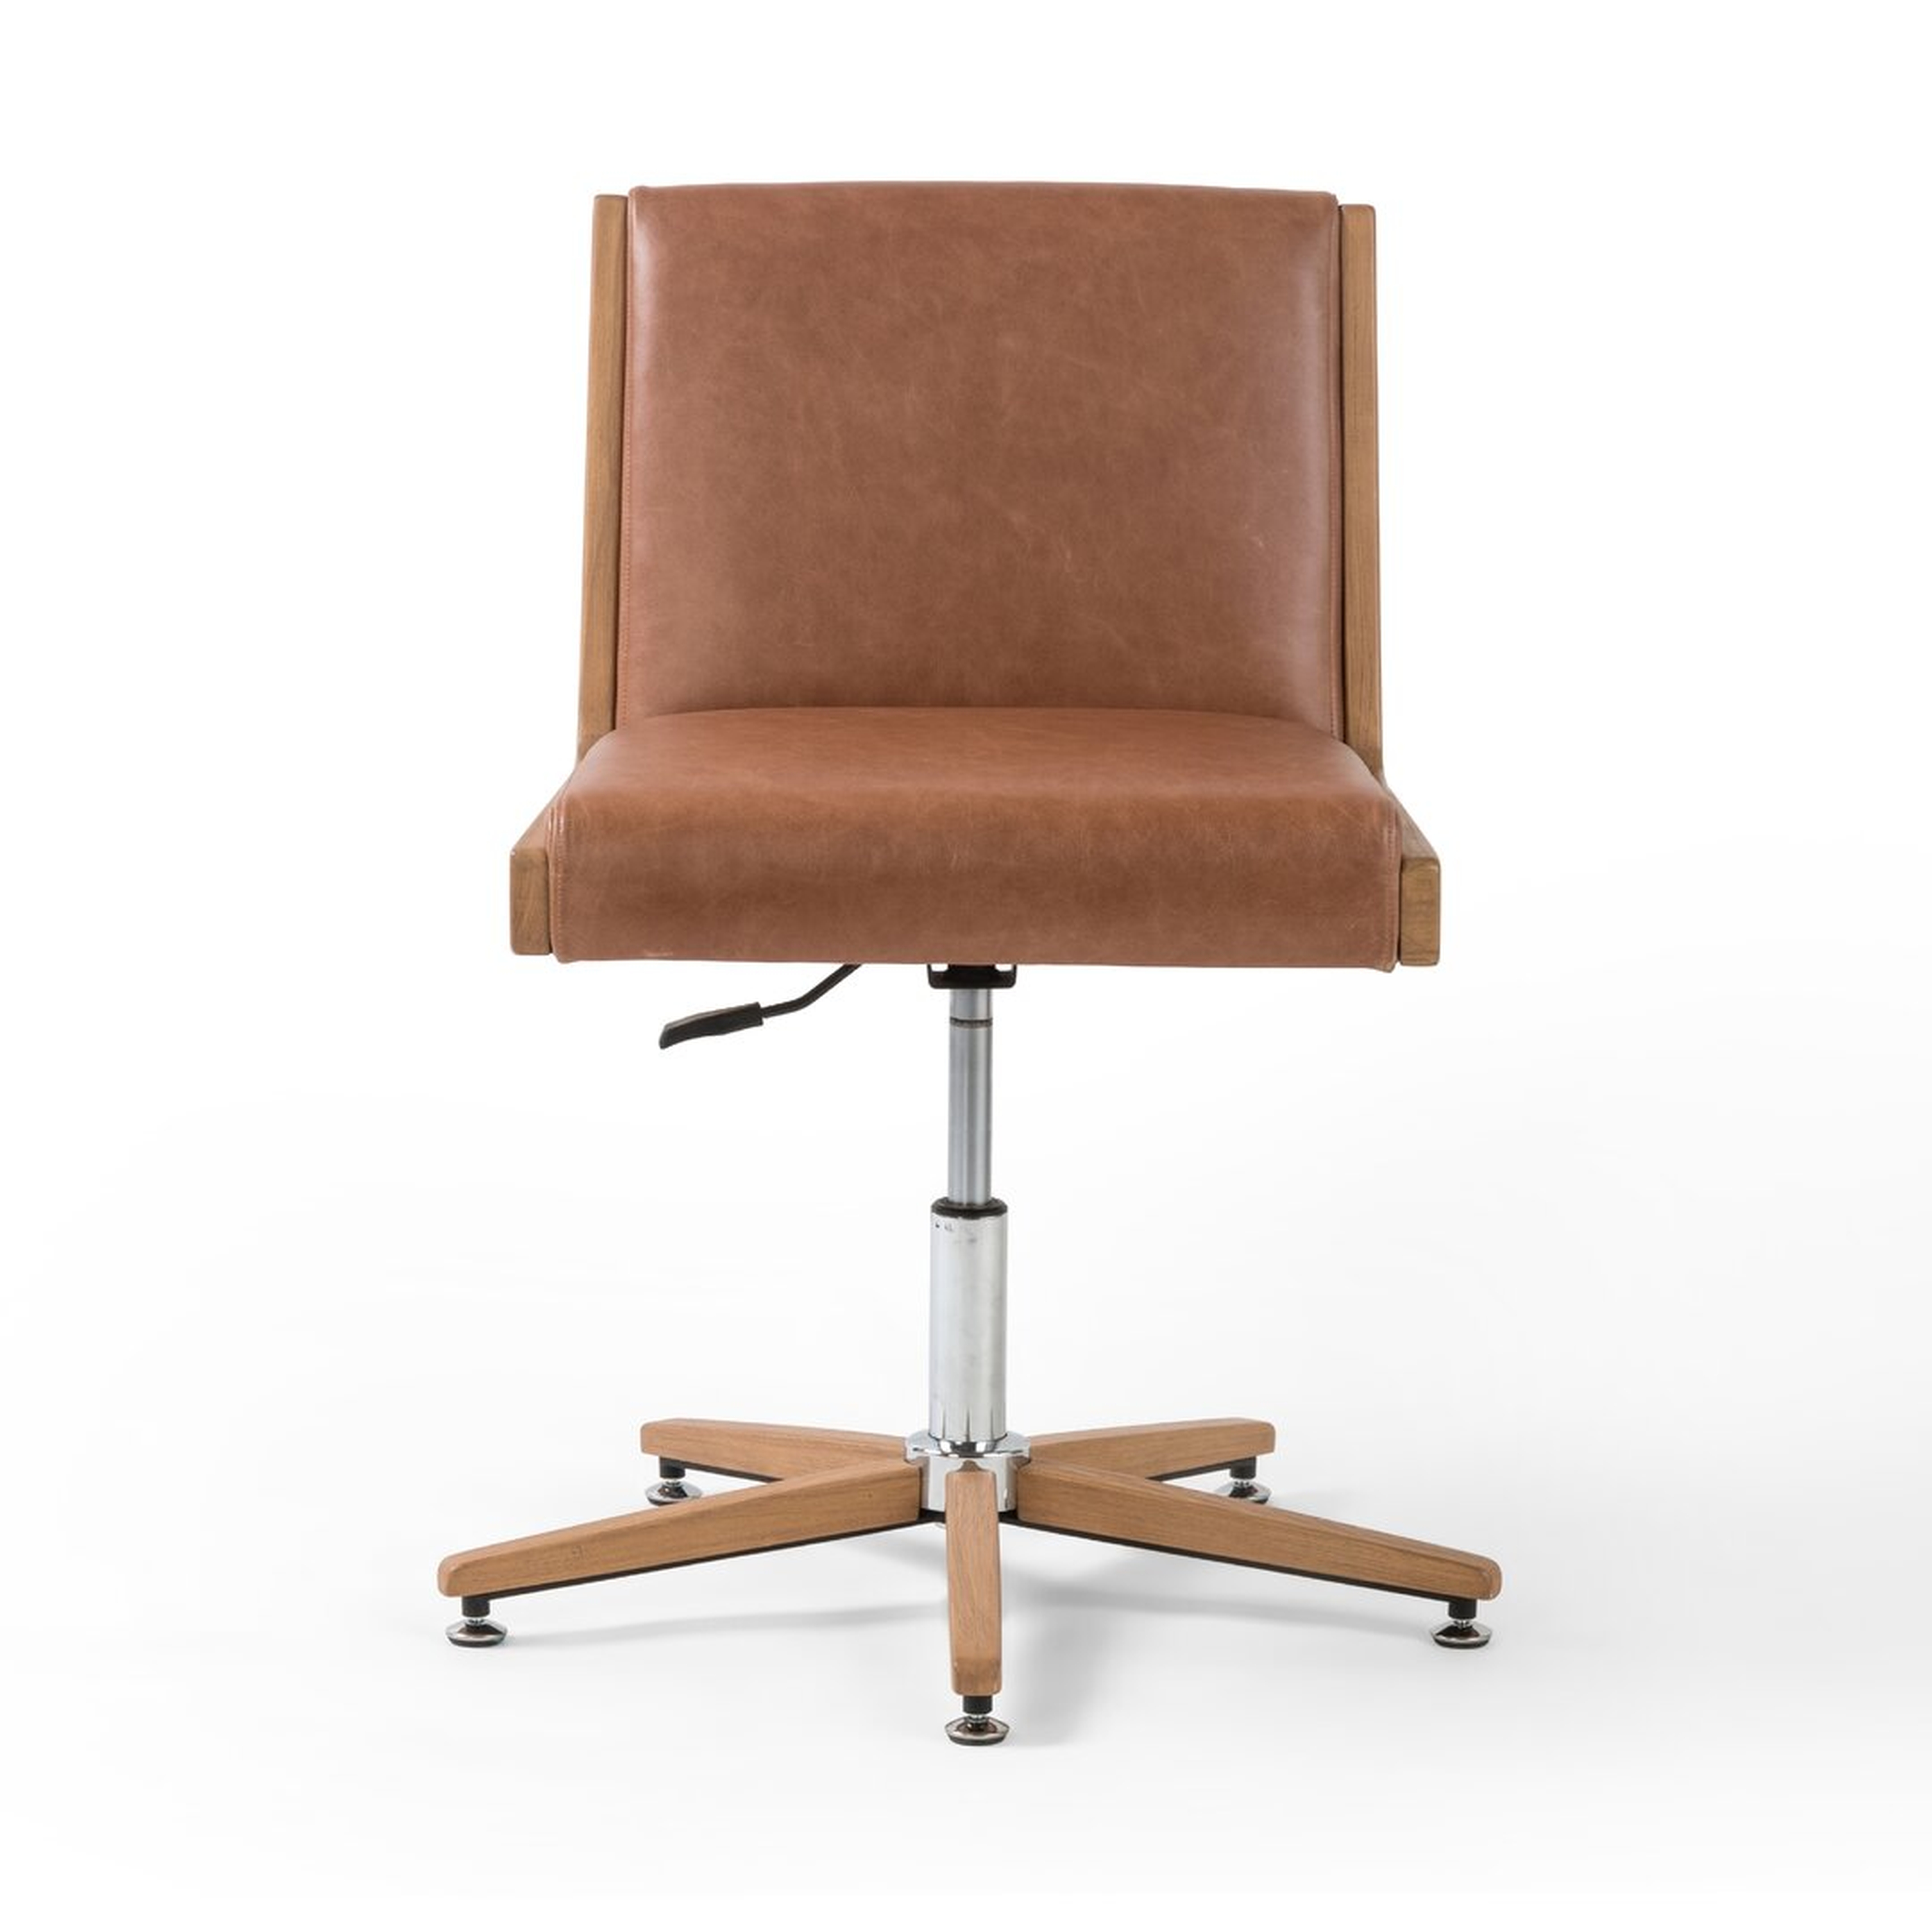 "Four Hands Carla Genuine Leather Task Chair" - Perigold